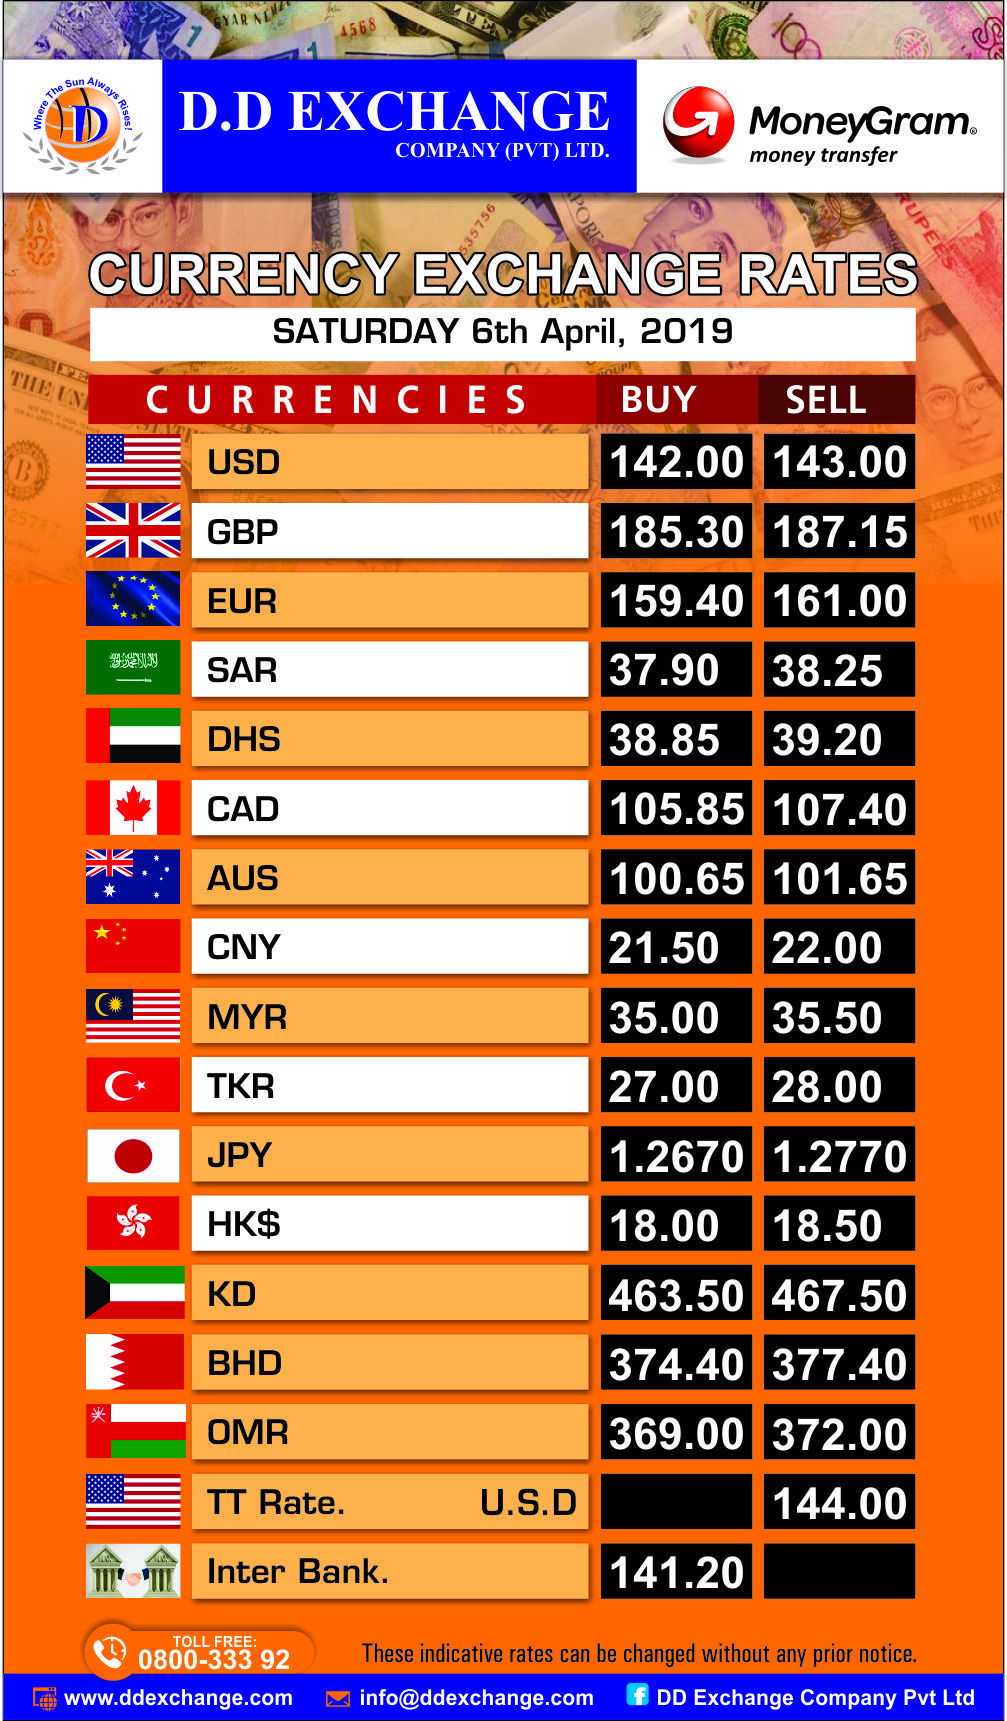 Daily Buy and Sell Exchange Rates | Central Bank of Sri Lanka